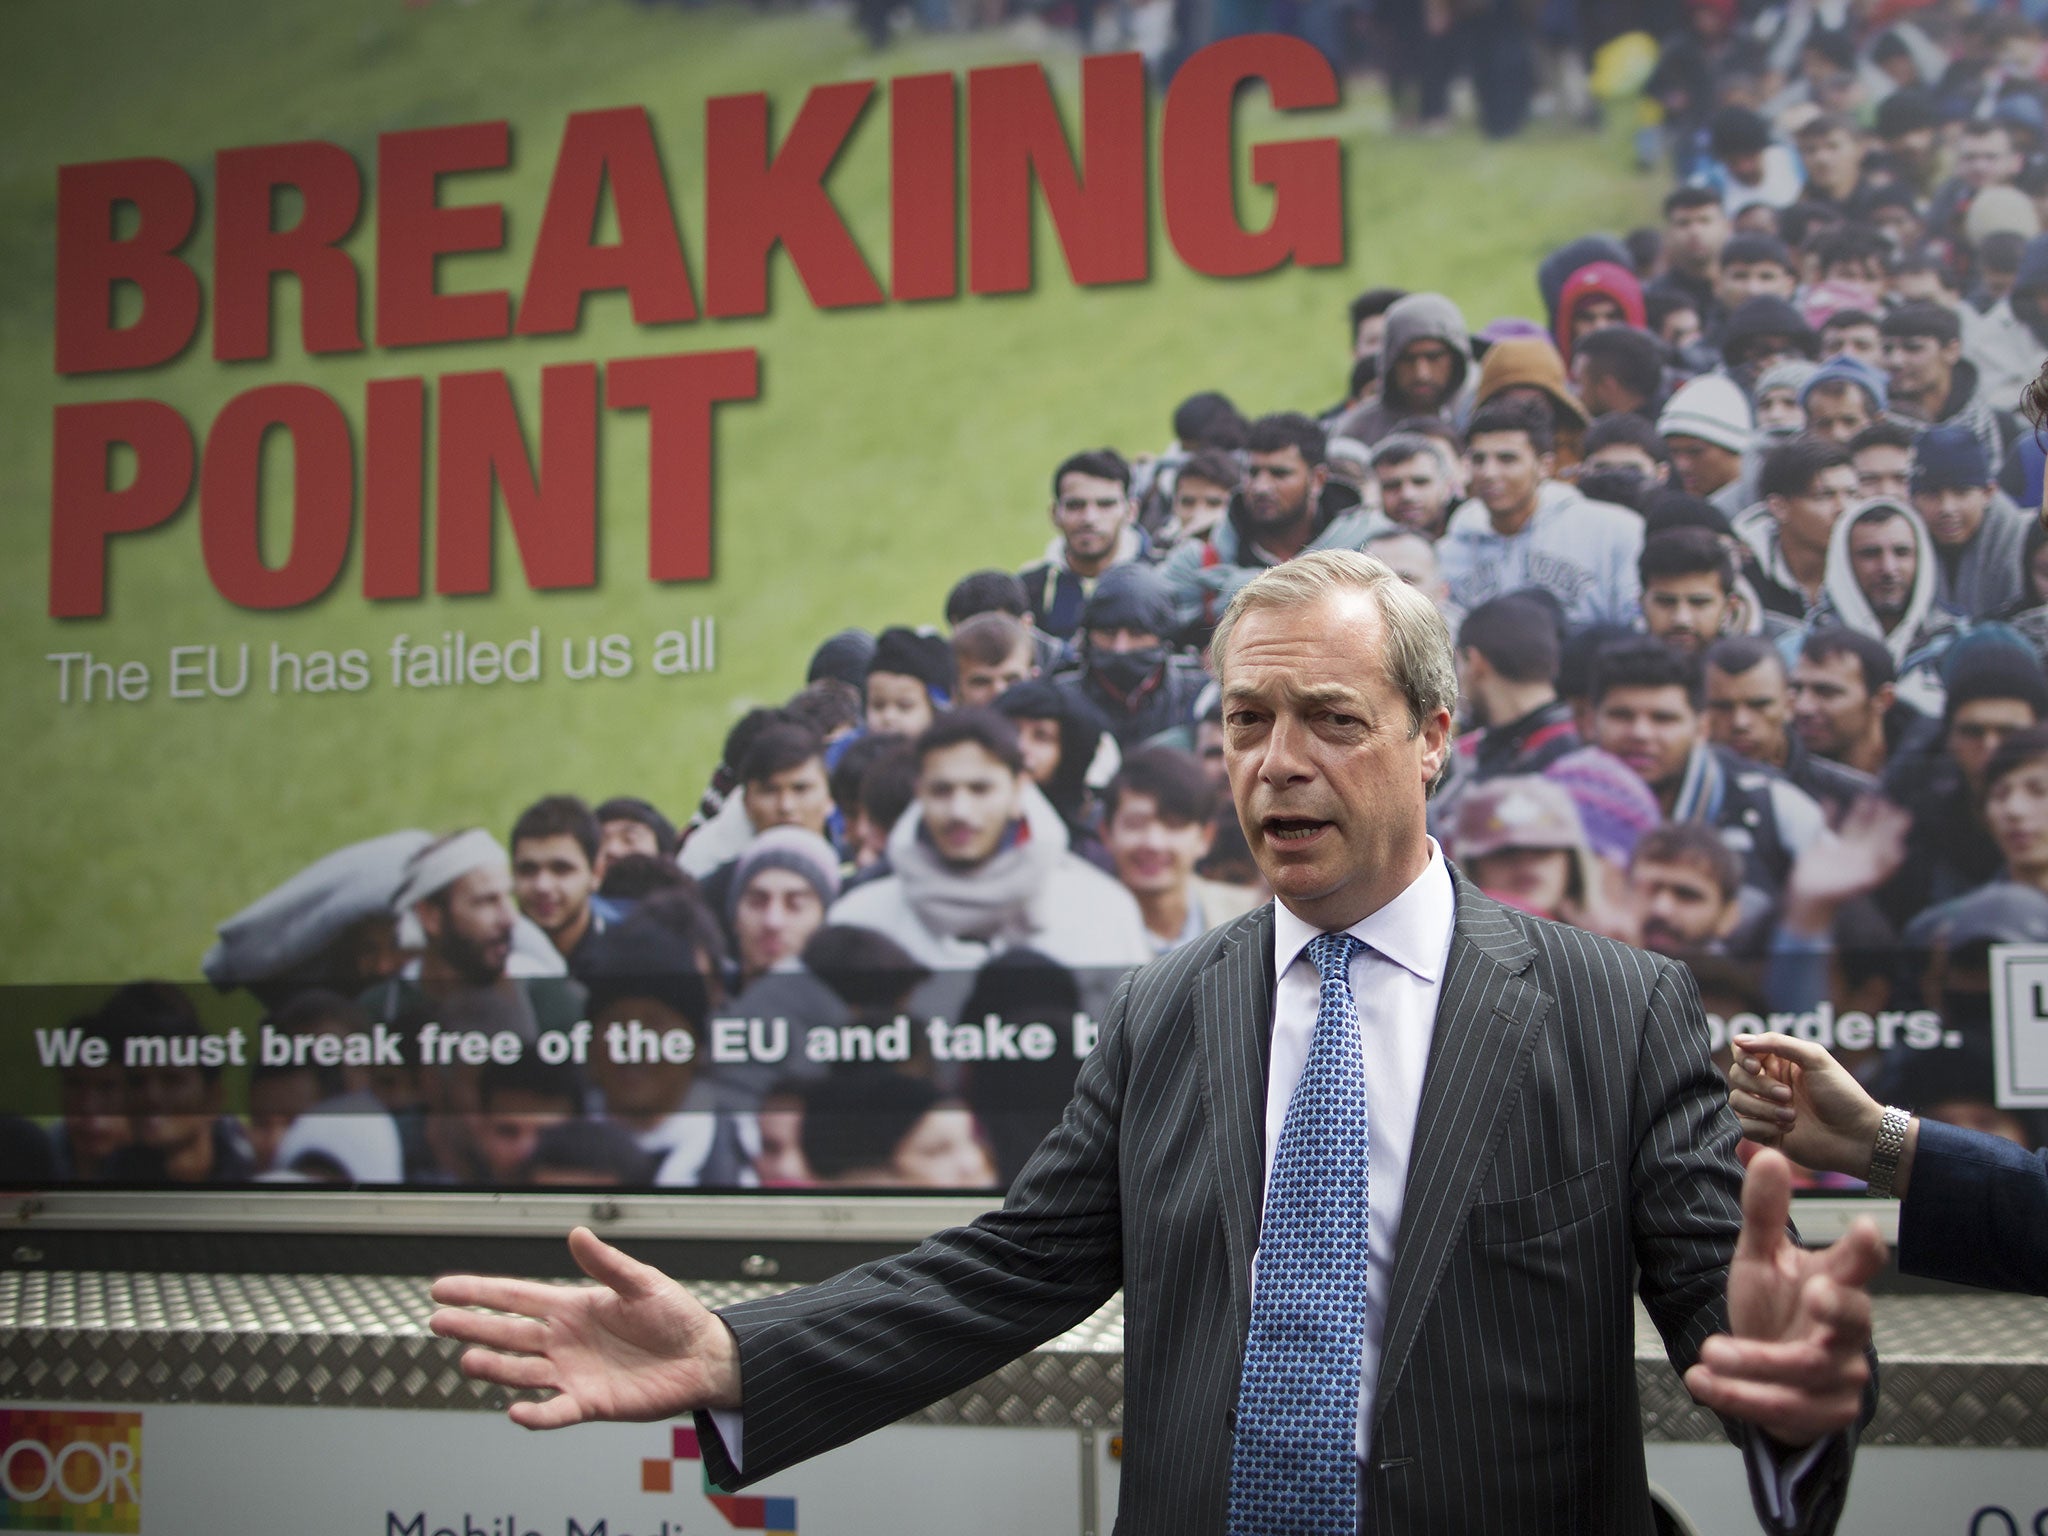 Nigel Farage poses next to his controversial 'Breaking Point' poster